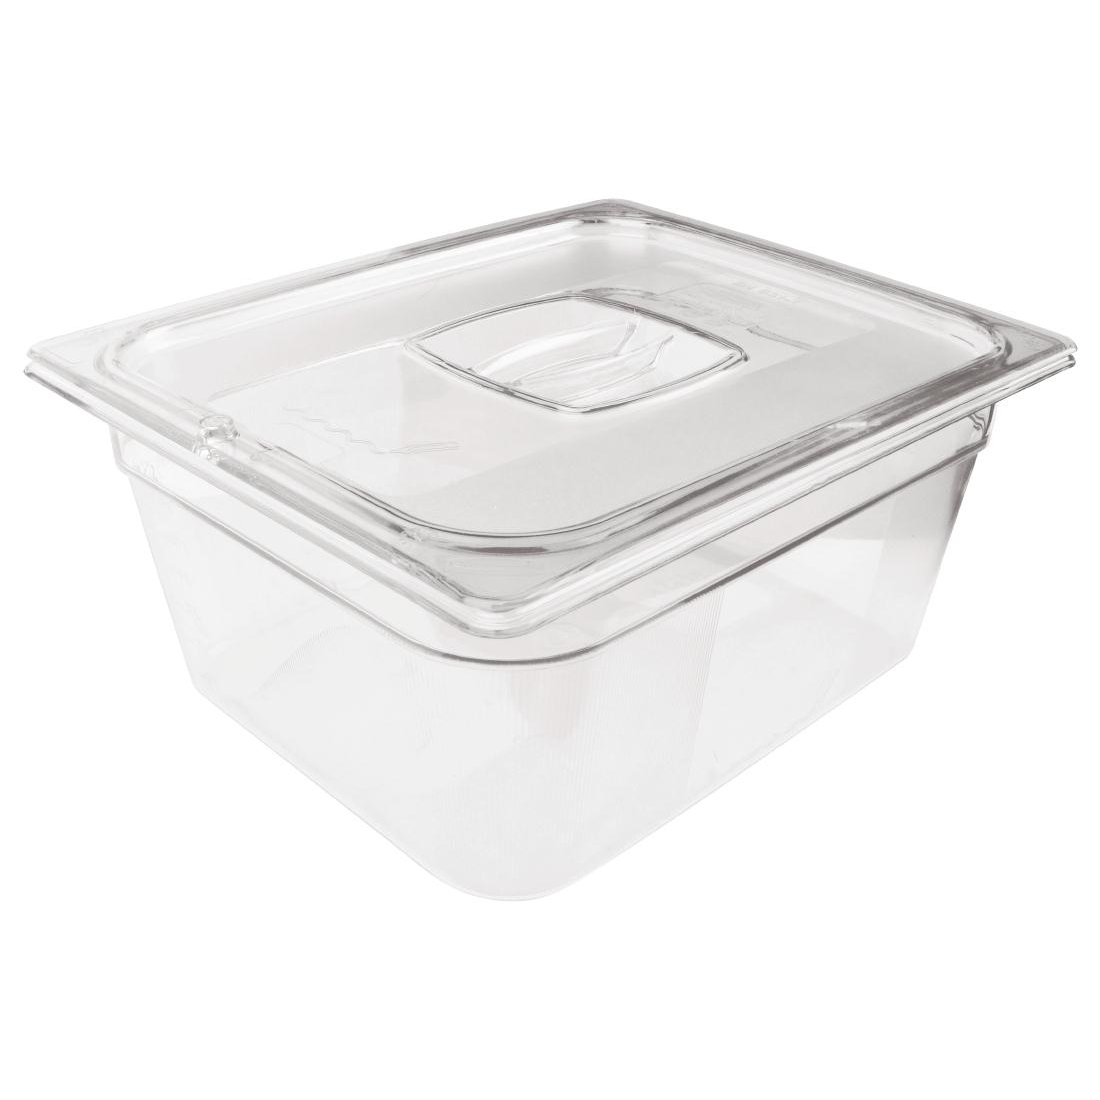 Rubbermaid Polycarbonate 1/2 Gastronorm Container 65mm Clear